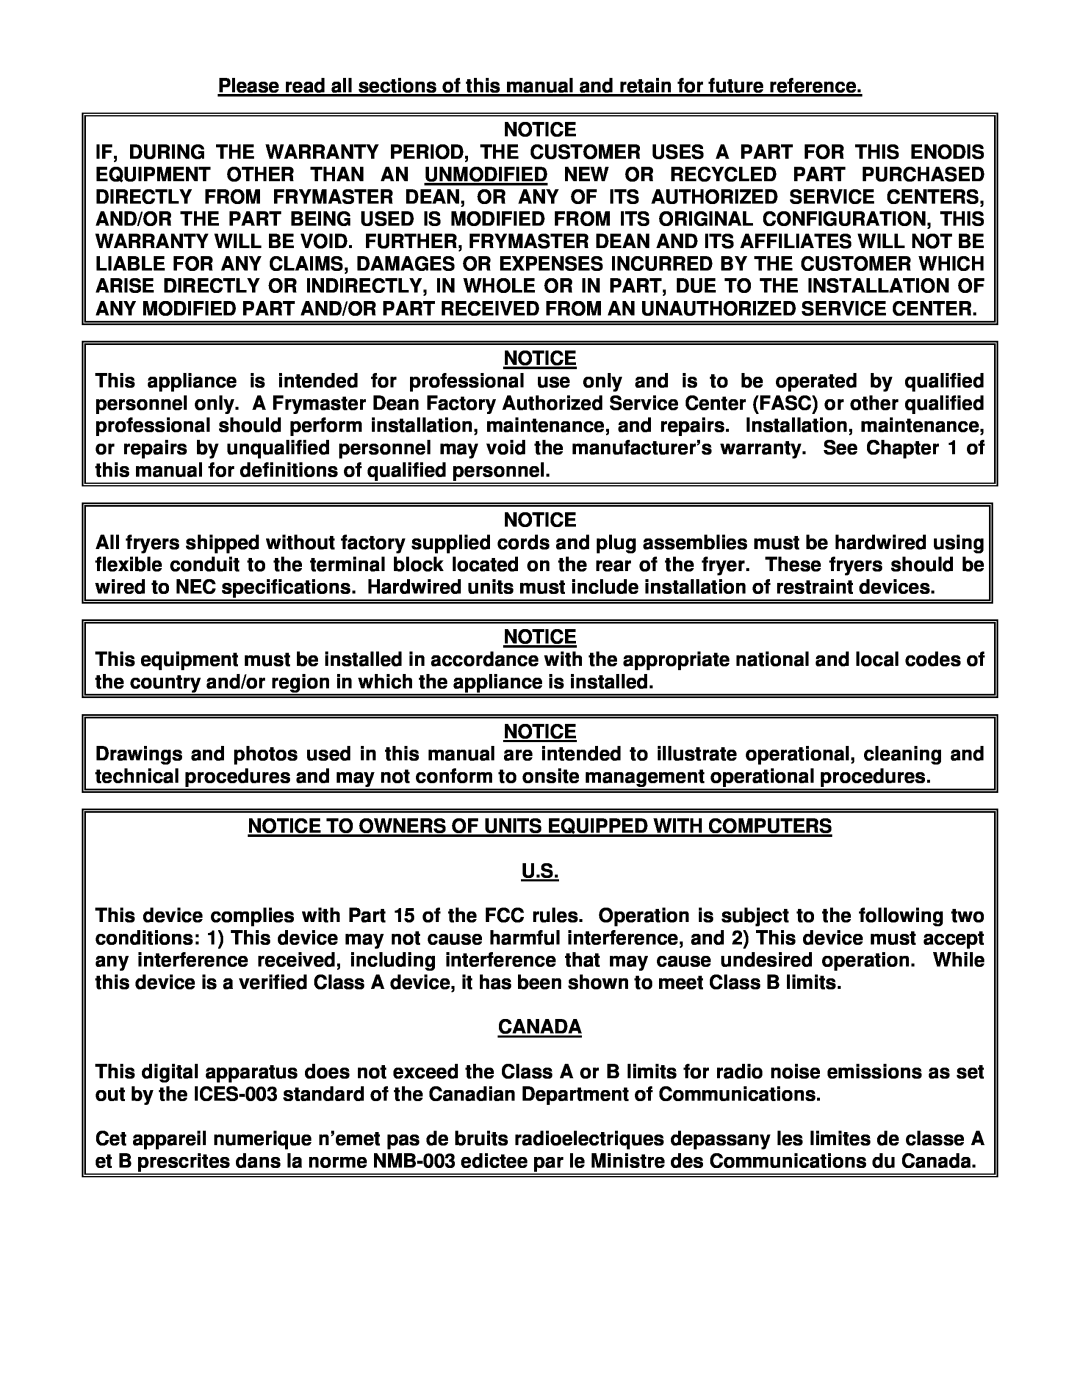 Frymaster 2424E, Combinations, 824E operation manual Notice To Owners Of Units Equipped With Computers, Canada 